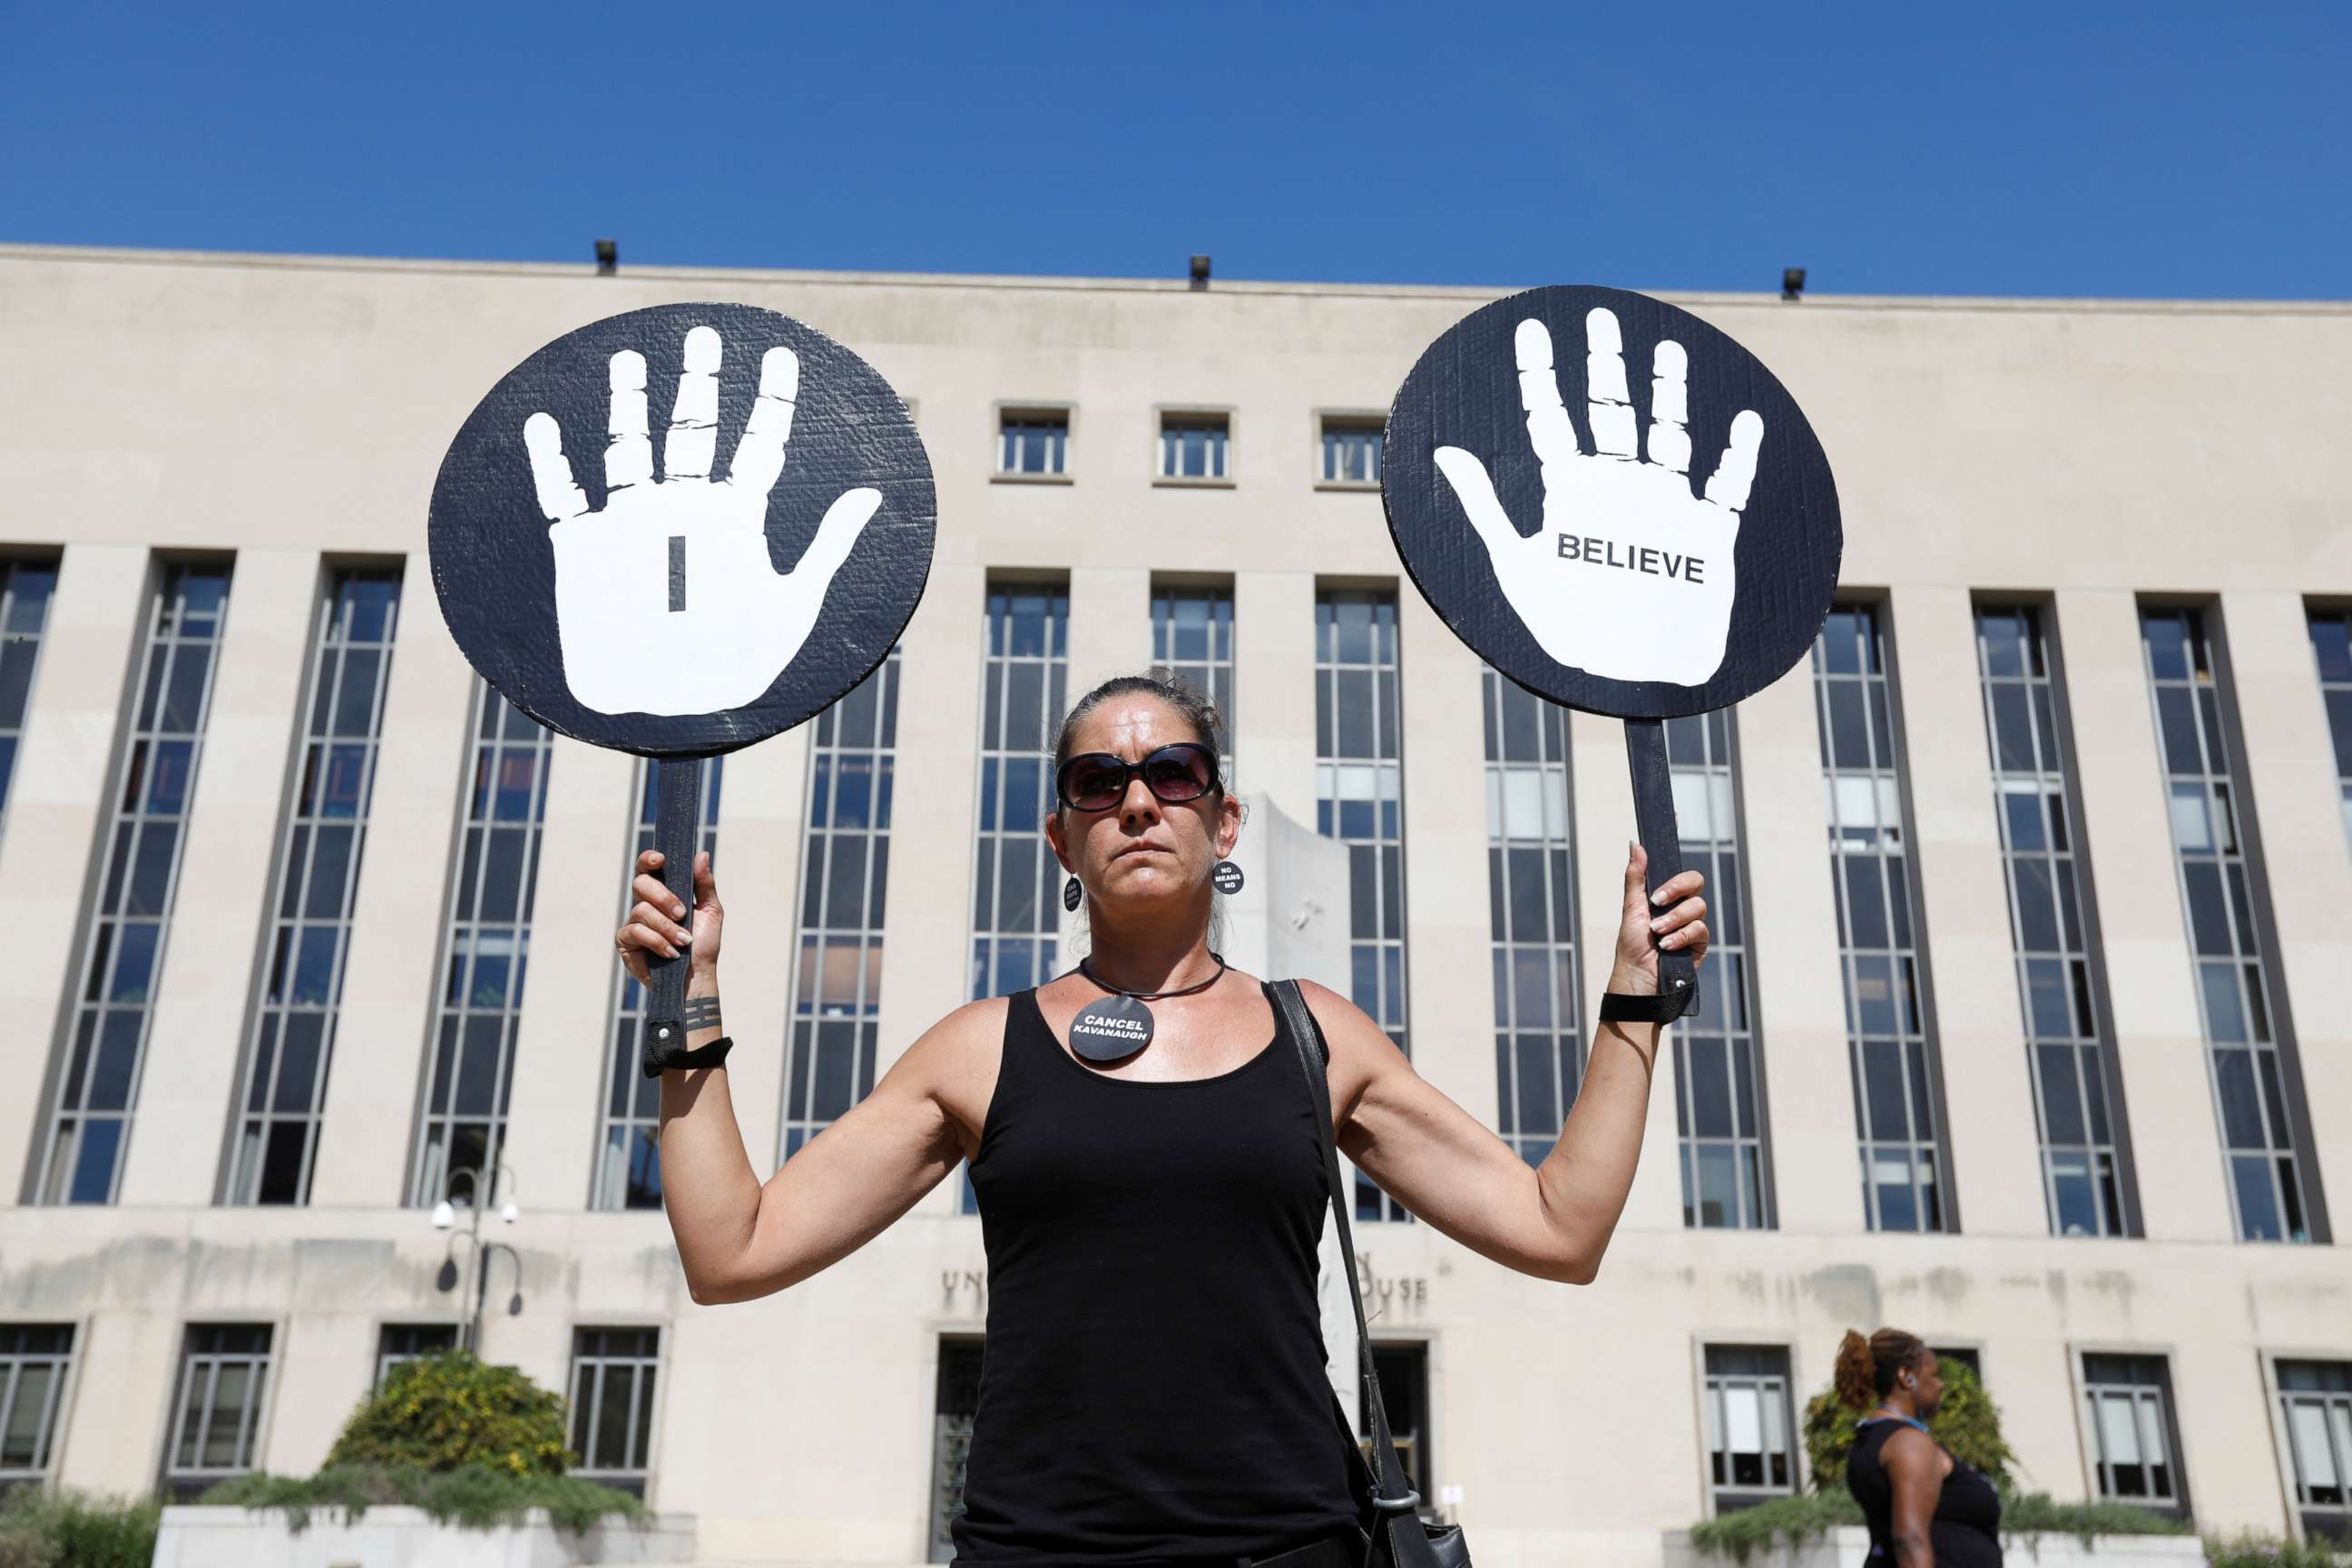 PHOTO: An woman expresses support for Christine Blasey Ford, the university professor who has accused U.S. Supreme Court nominee Brett Kavanaugh of sexual assault in 1982voutside U.S. District Court in Washington, Oct. 4, 2018.